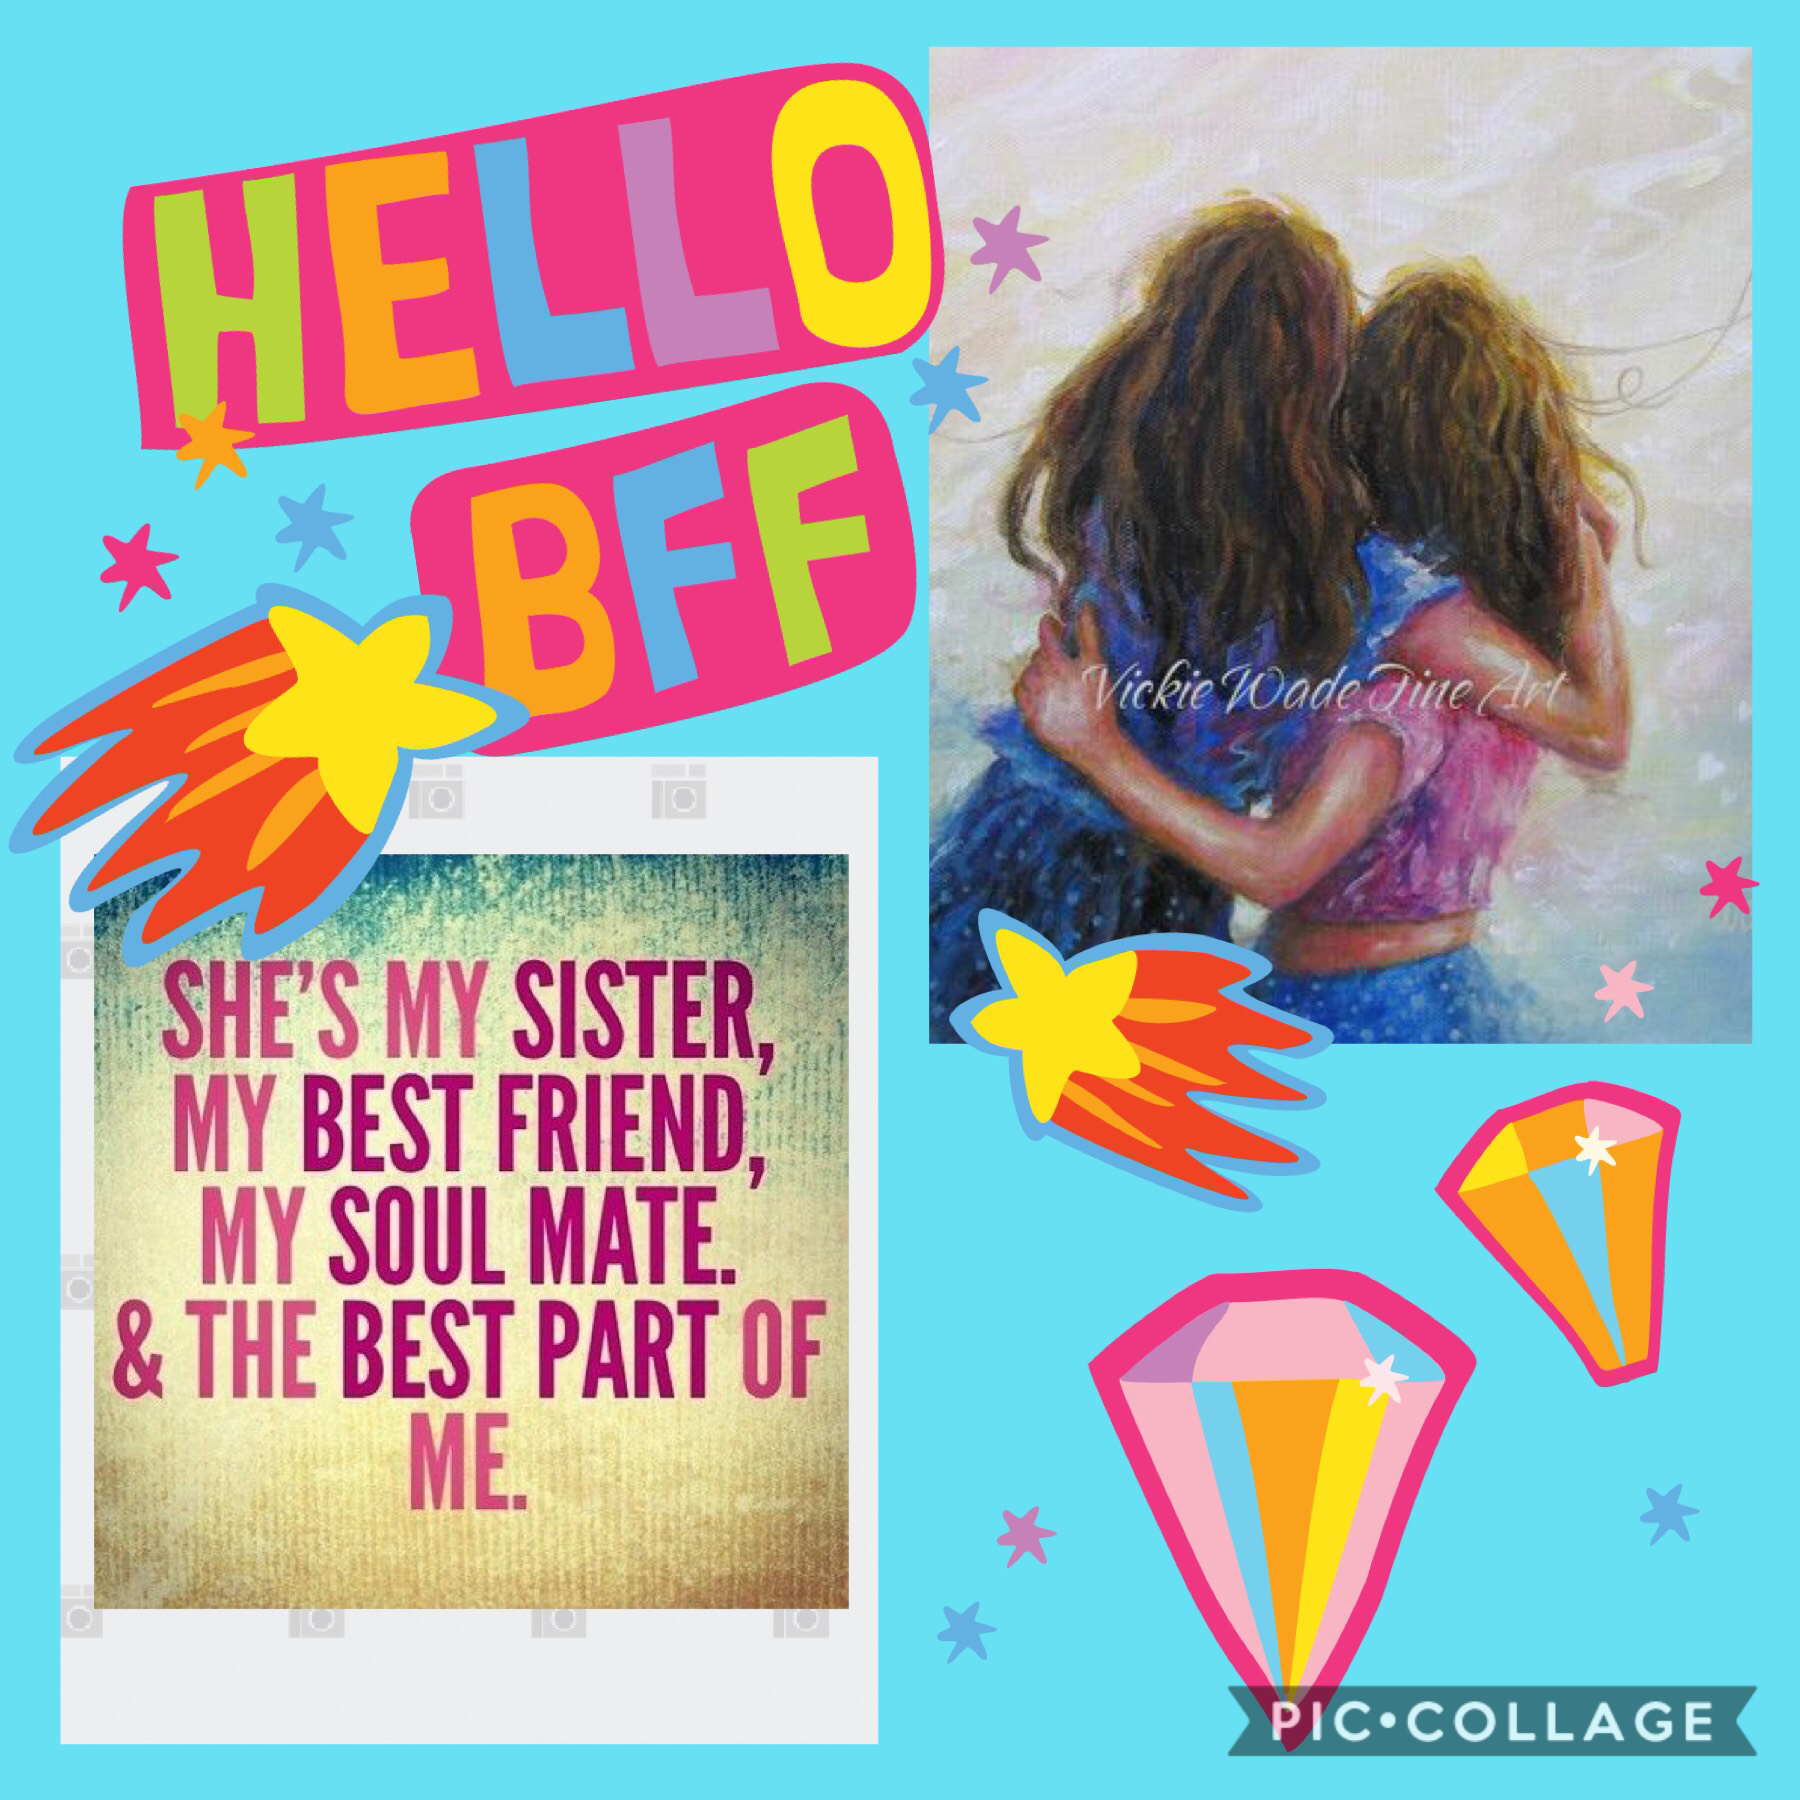 My sister is the best part of my life
